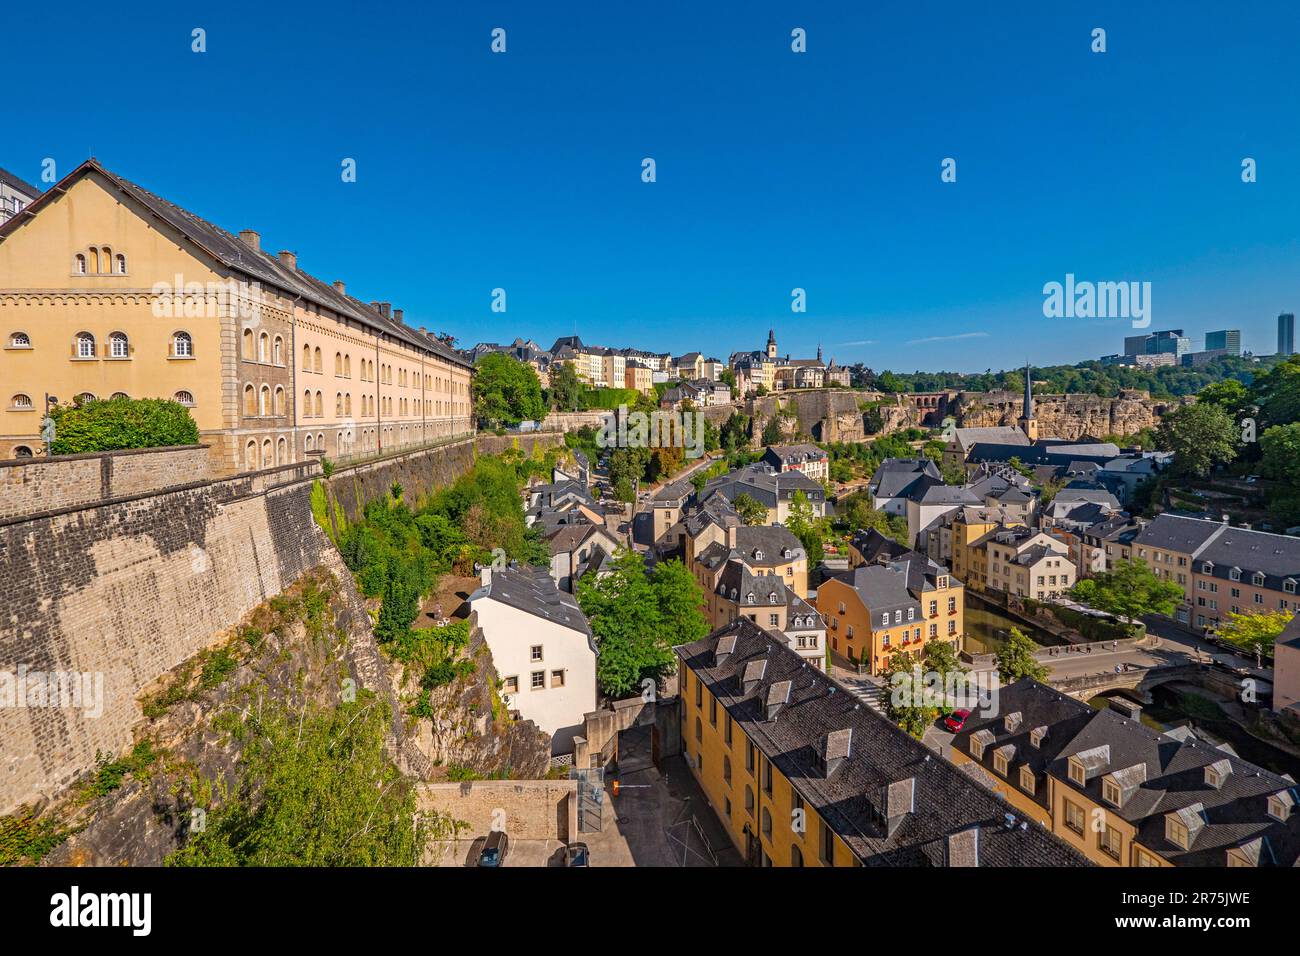 Lower Ground, Luxembourg City, Benelux, pays du Benelux, Luxembourg Banque D'Images